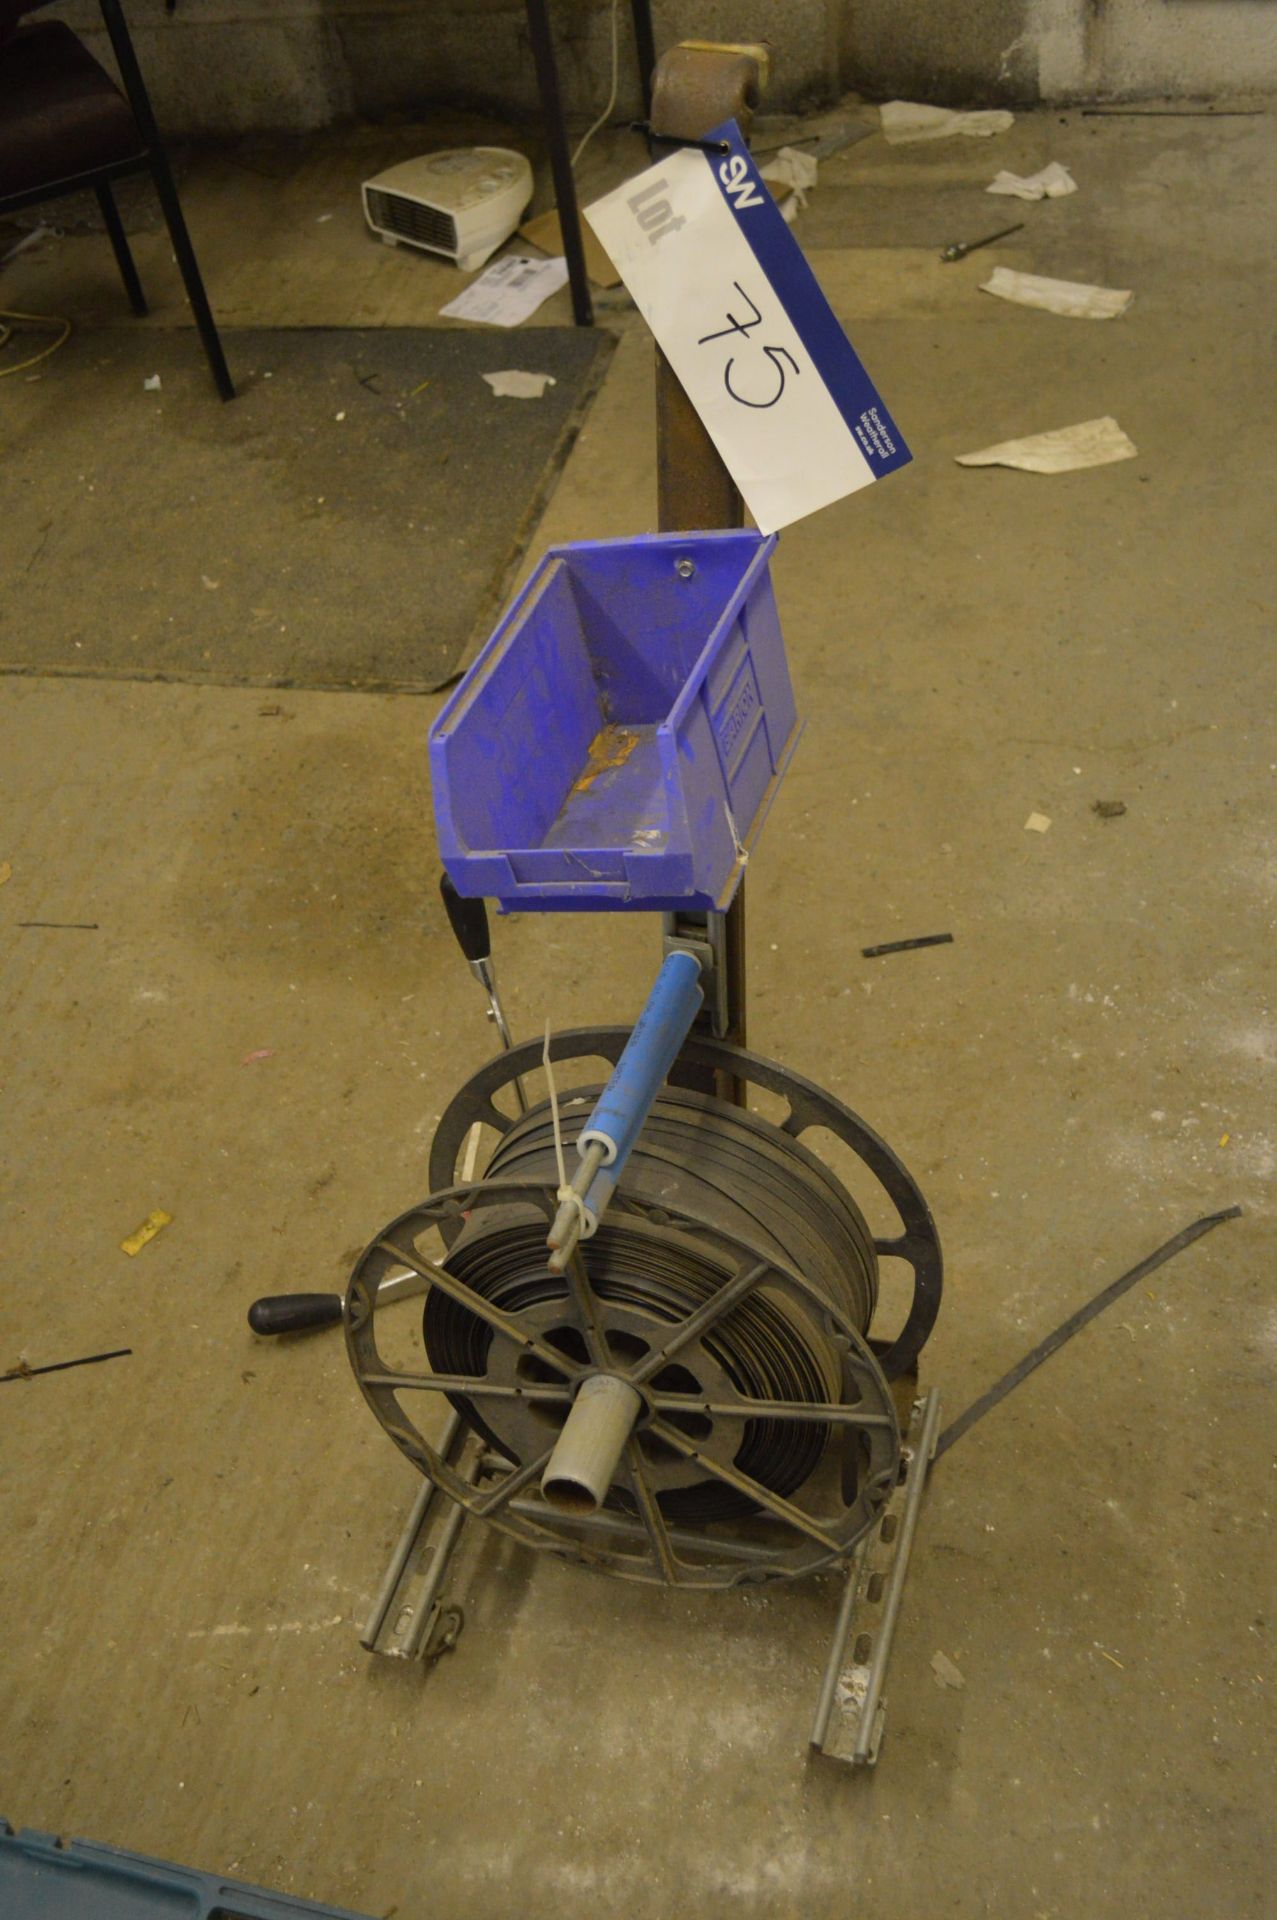 Strap Banding Tool, with strap banding and trolley